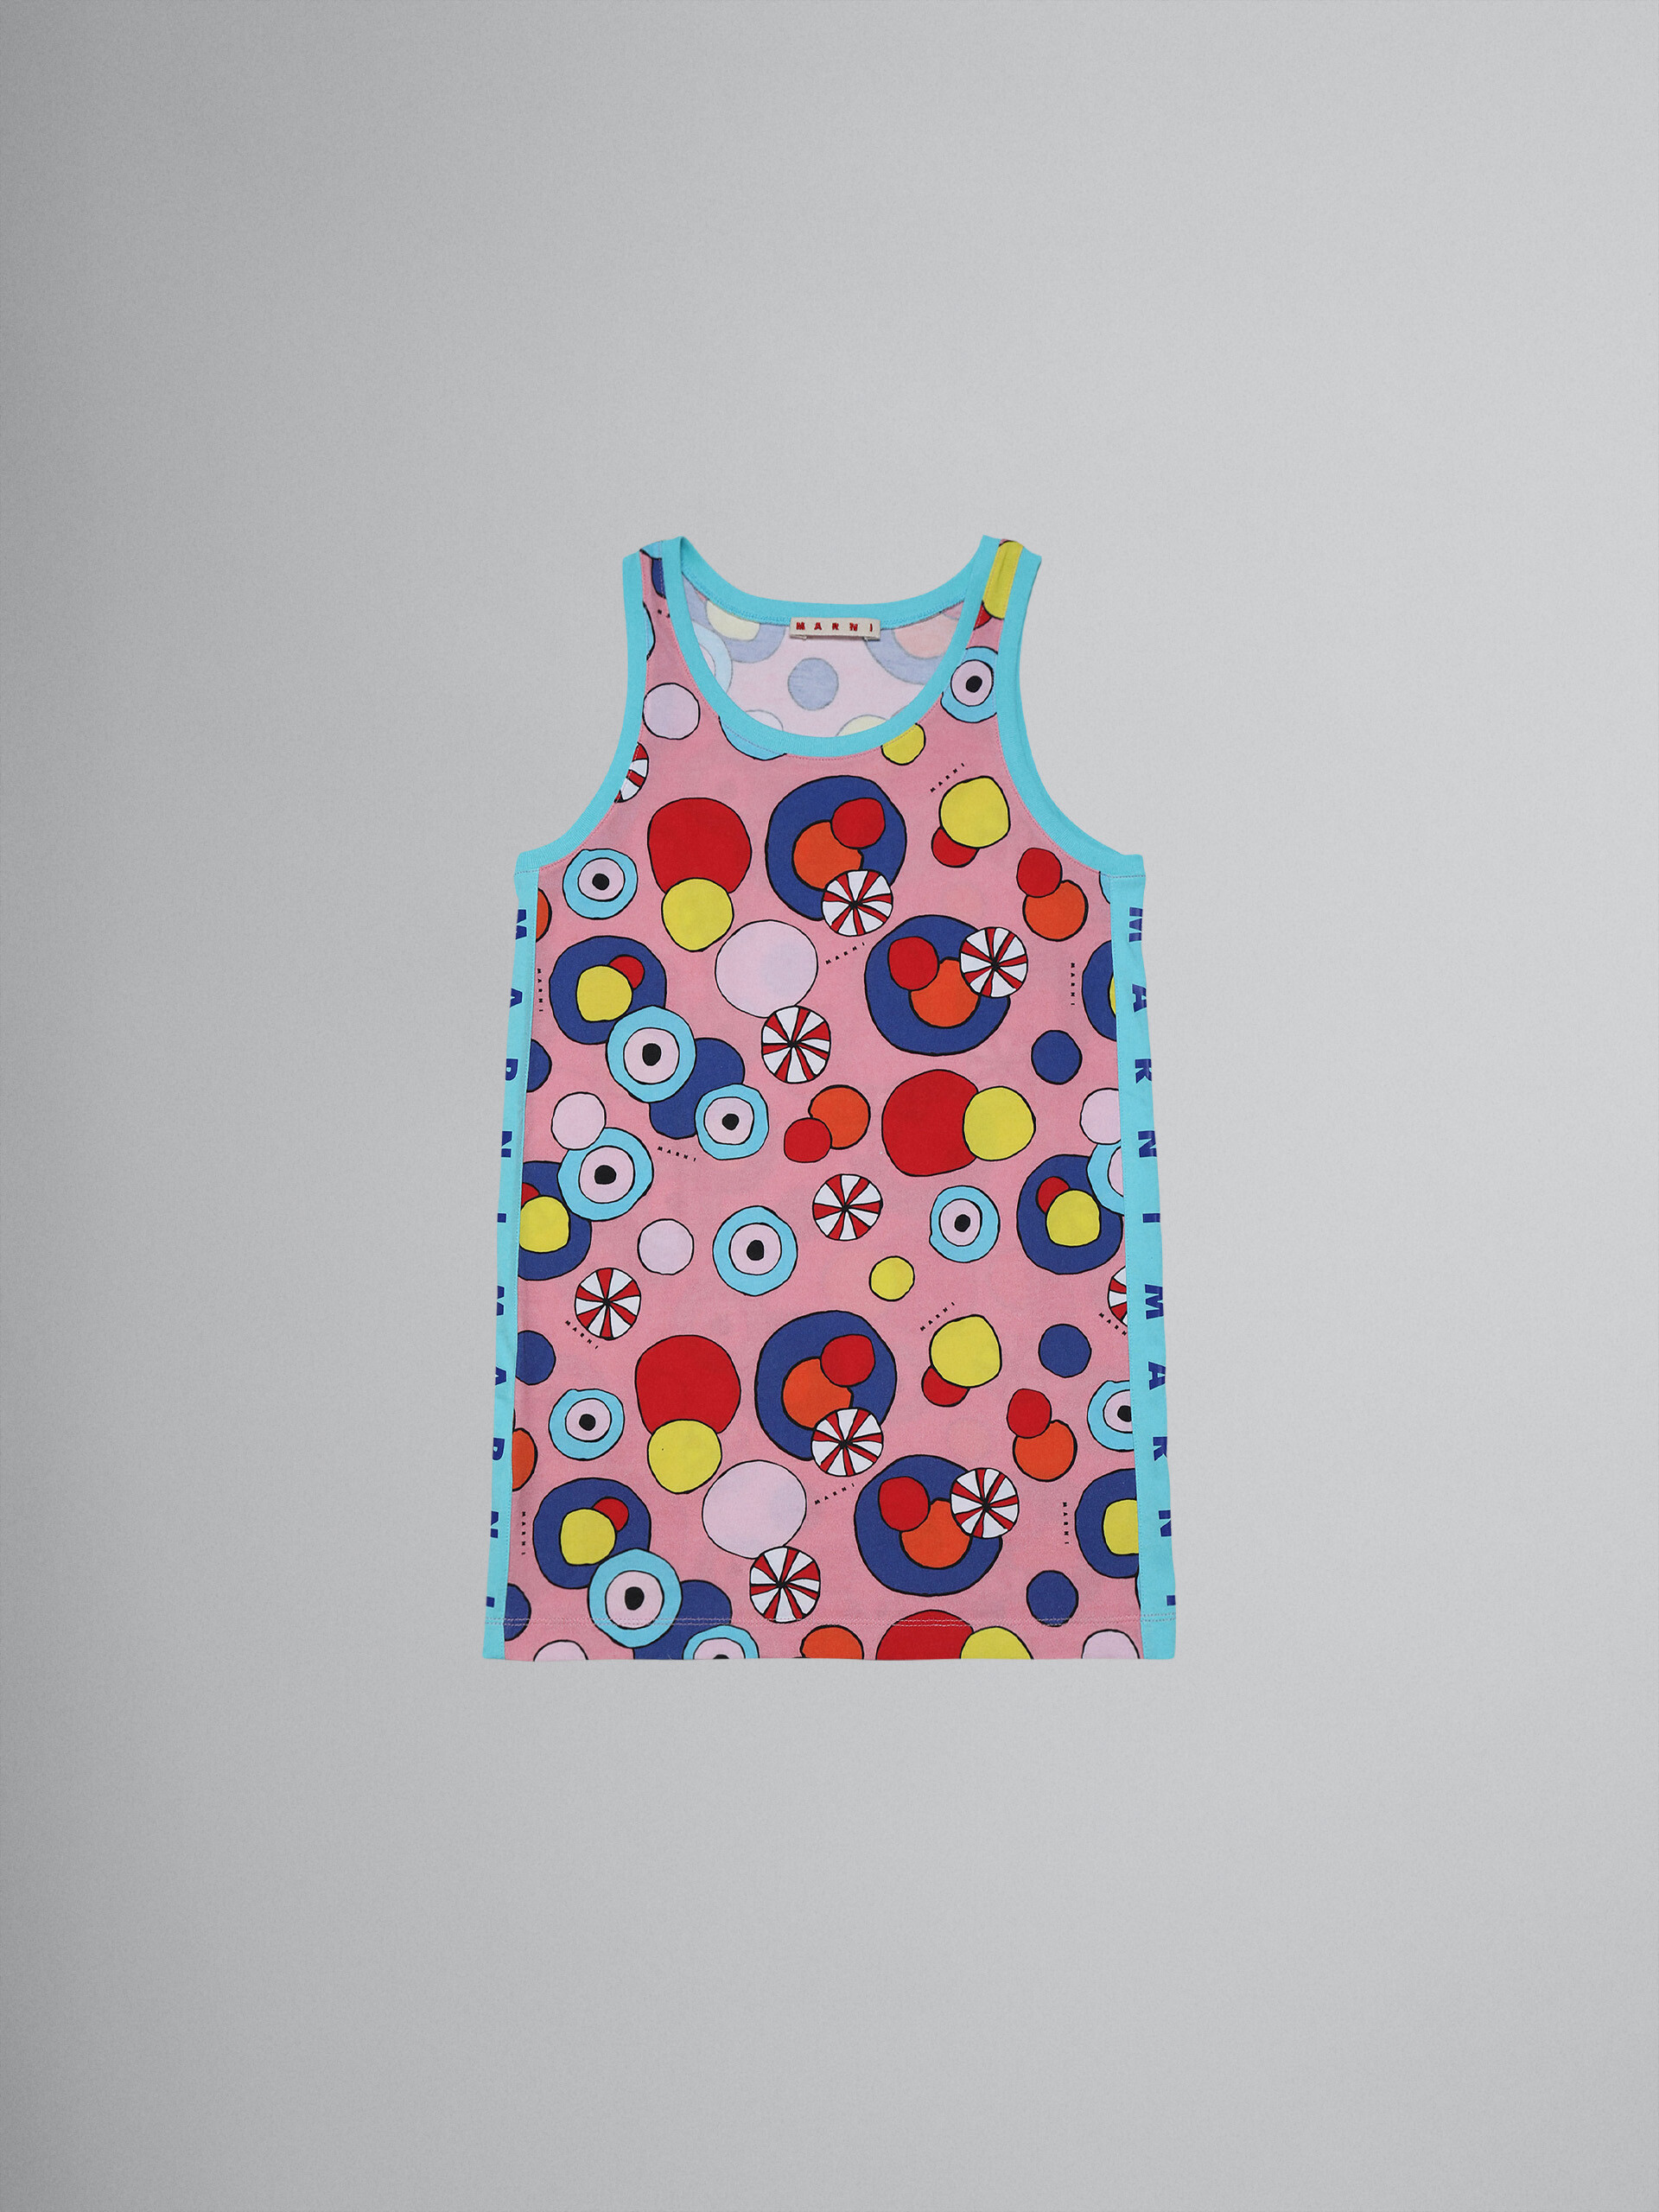 Ombrelloni print cotton jersey cover-up - Beachwear - Image 1